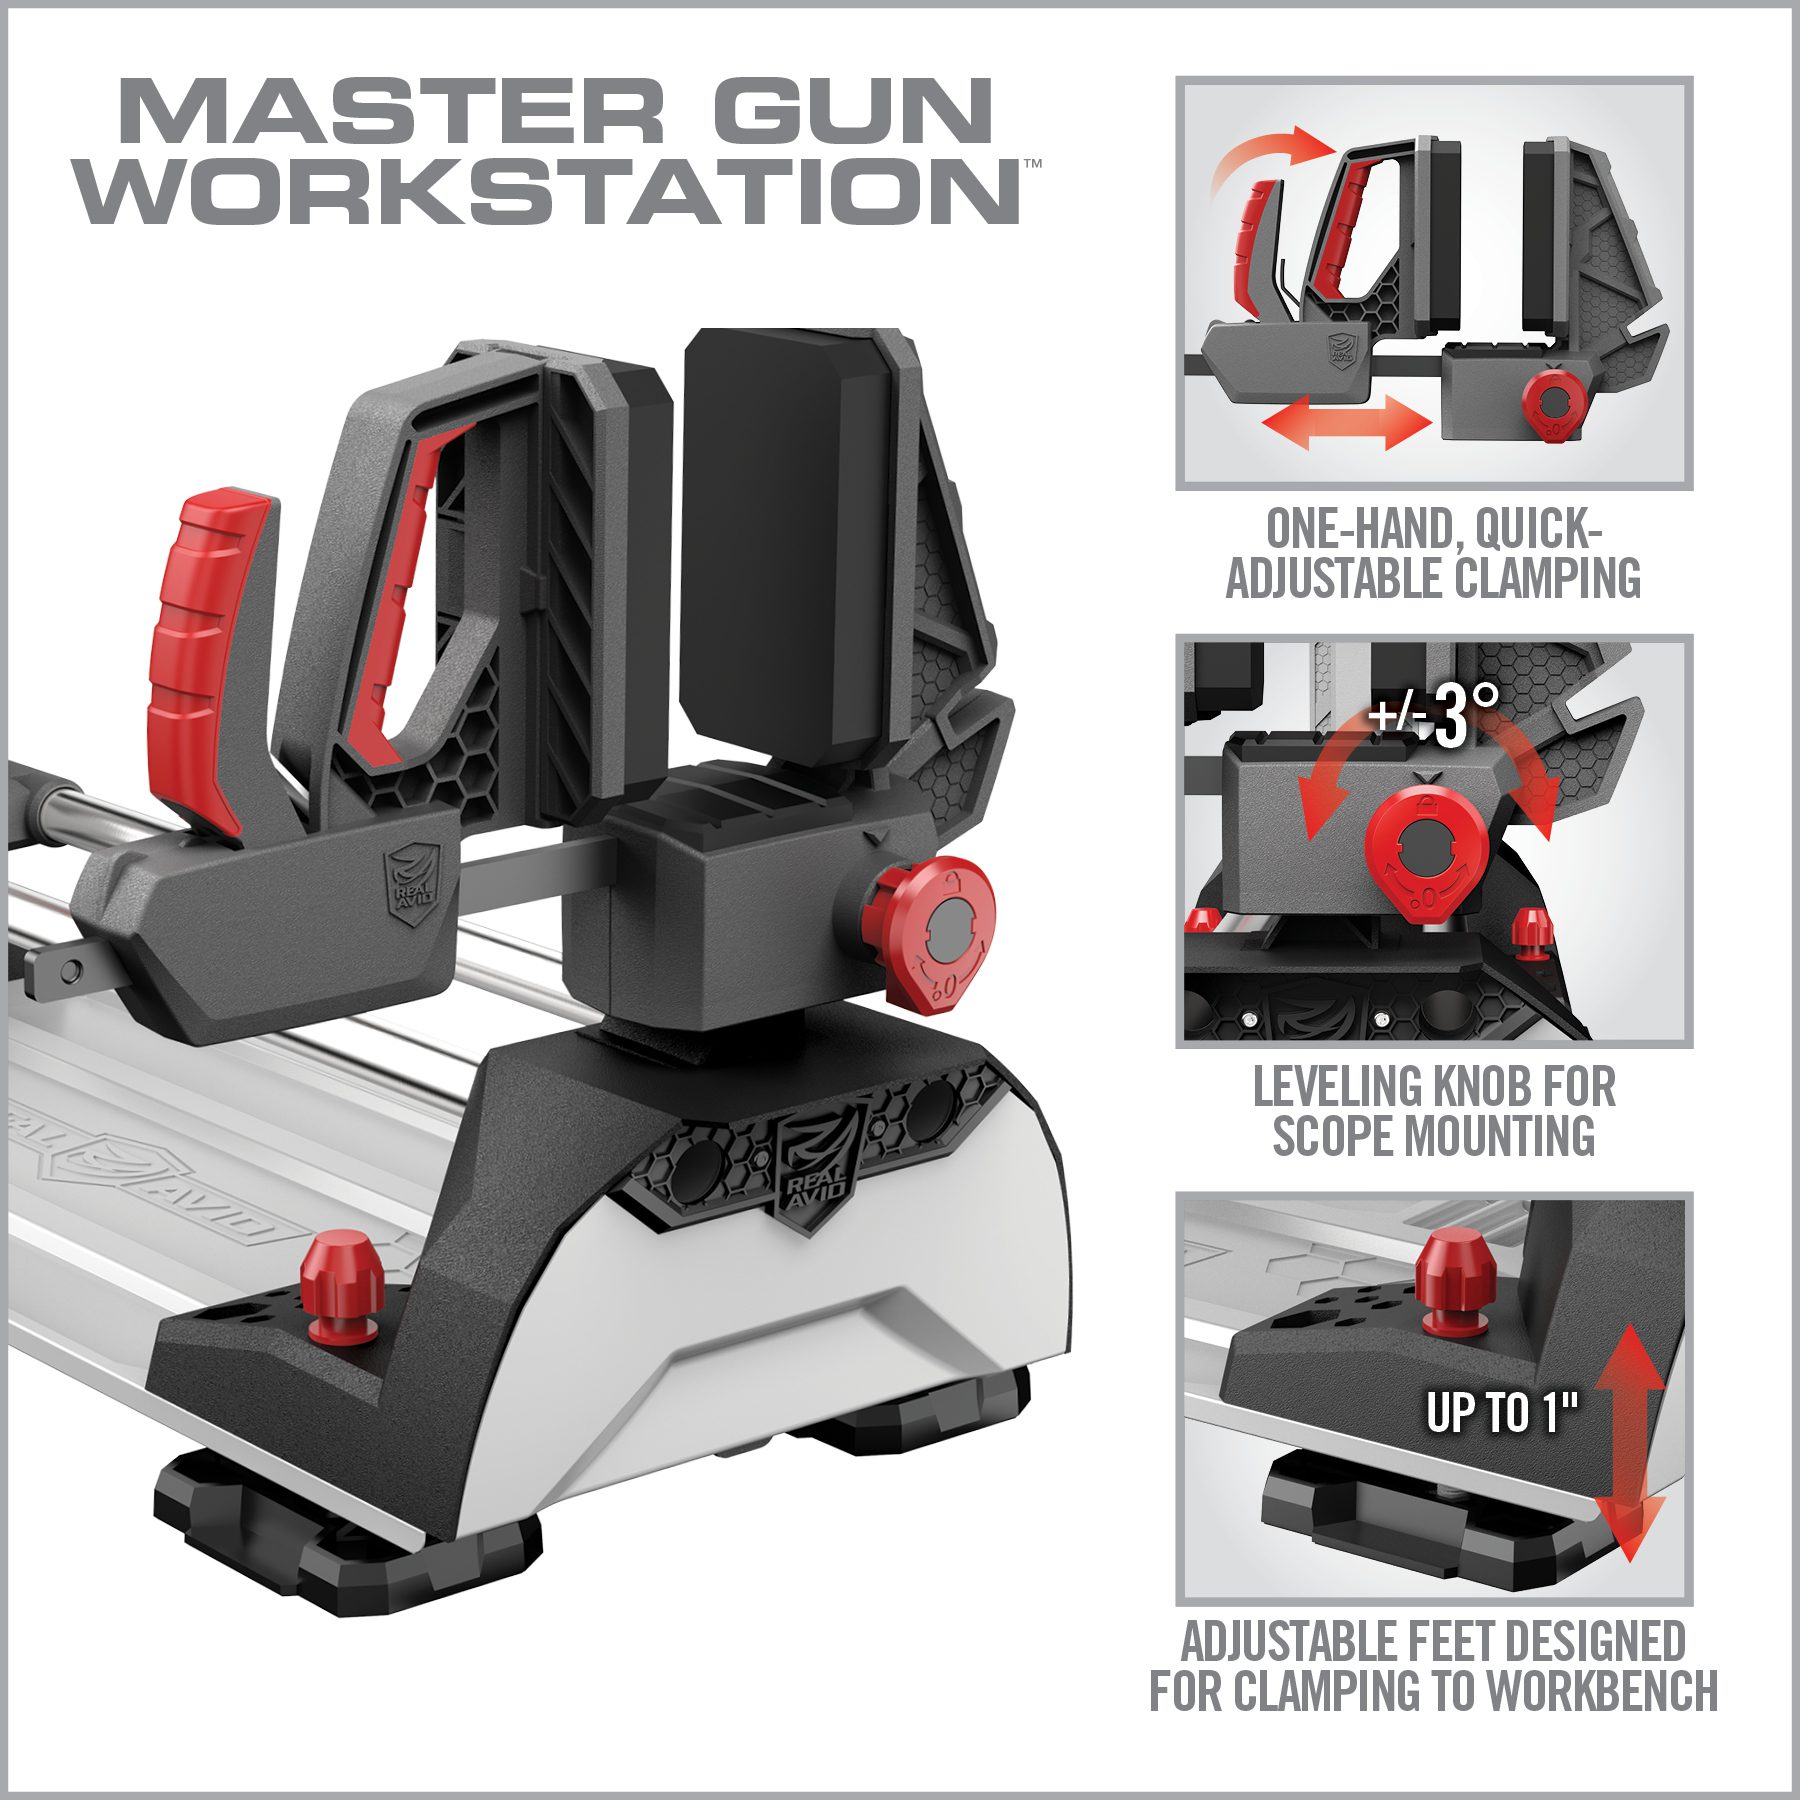 the instructions on how to use the master gun workstation